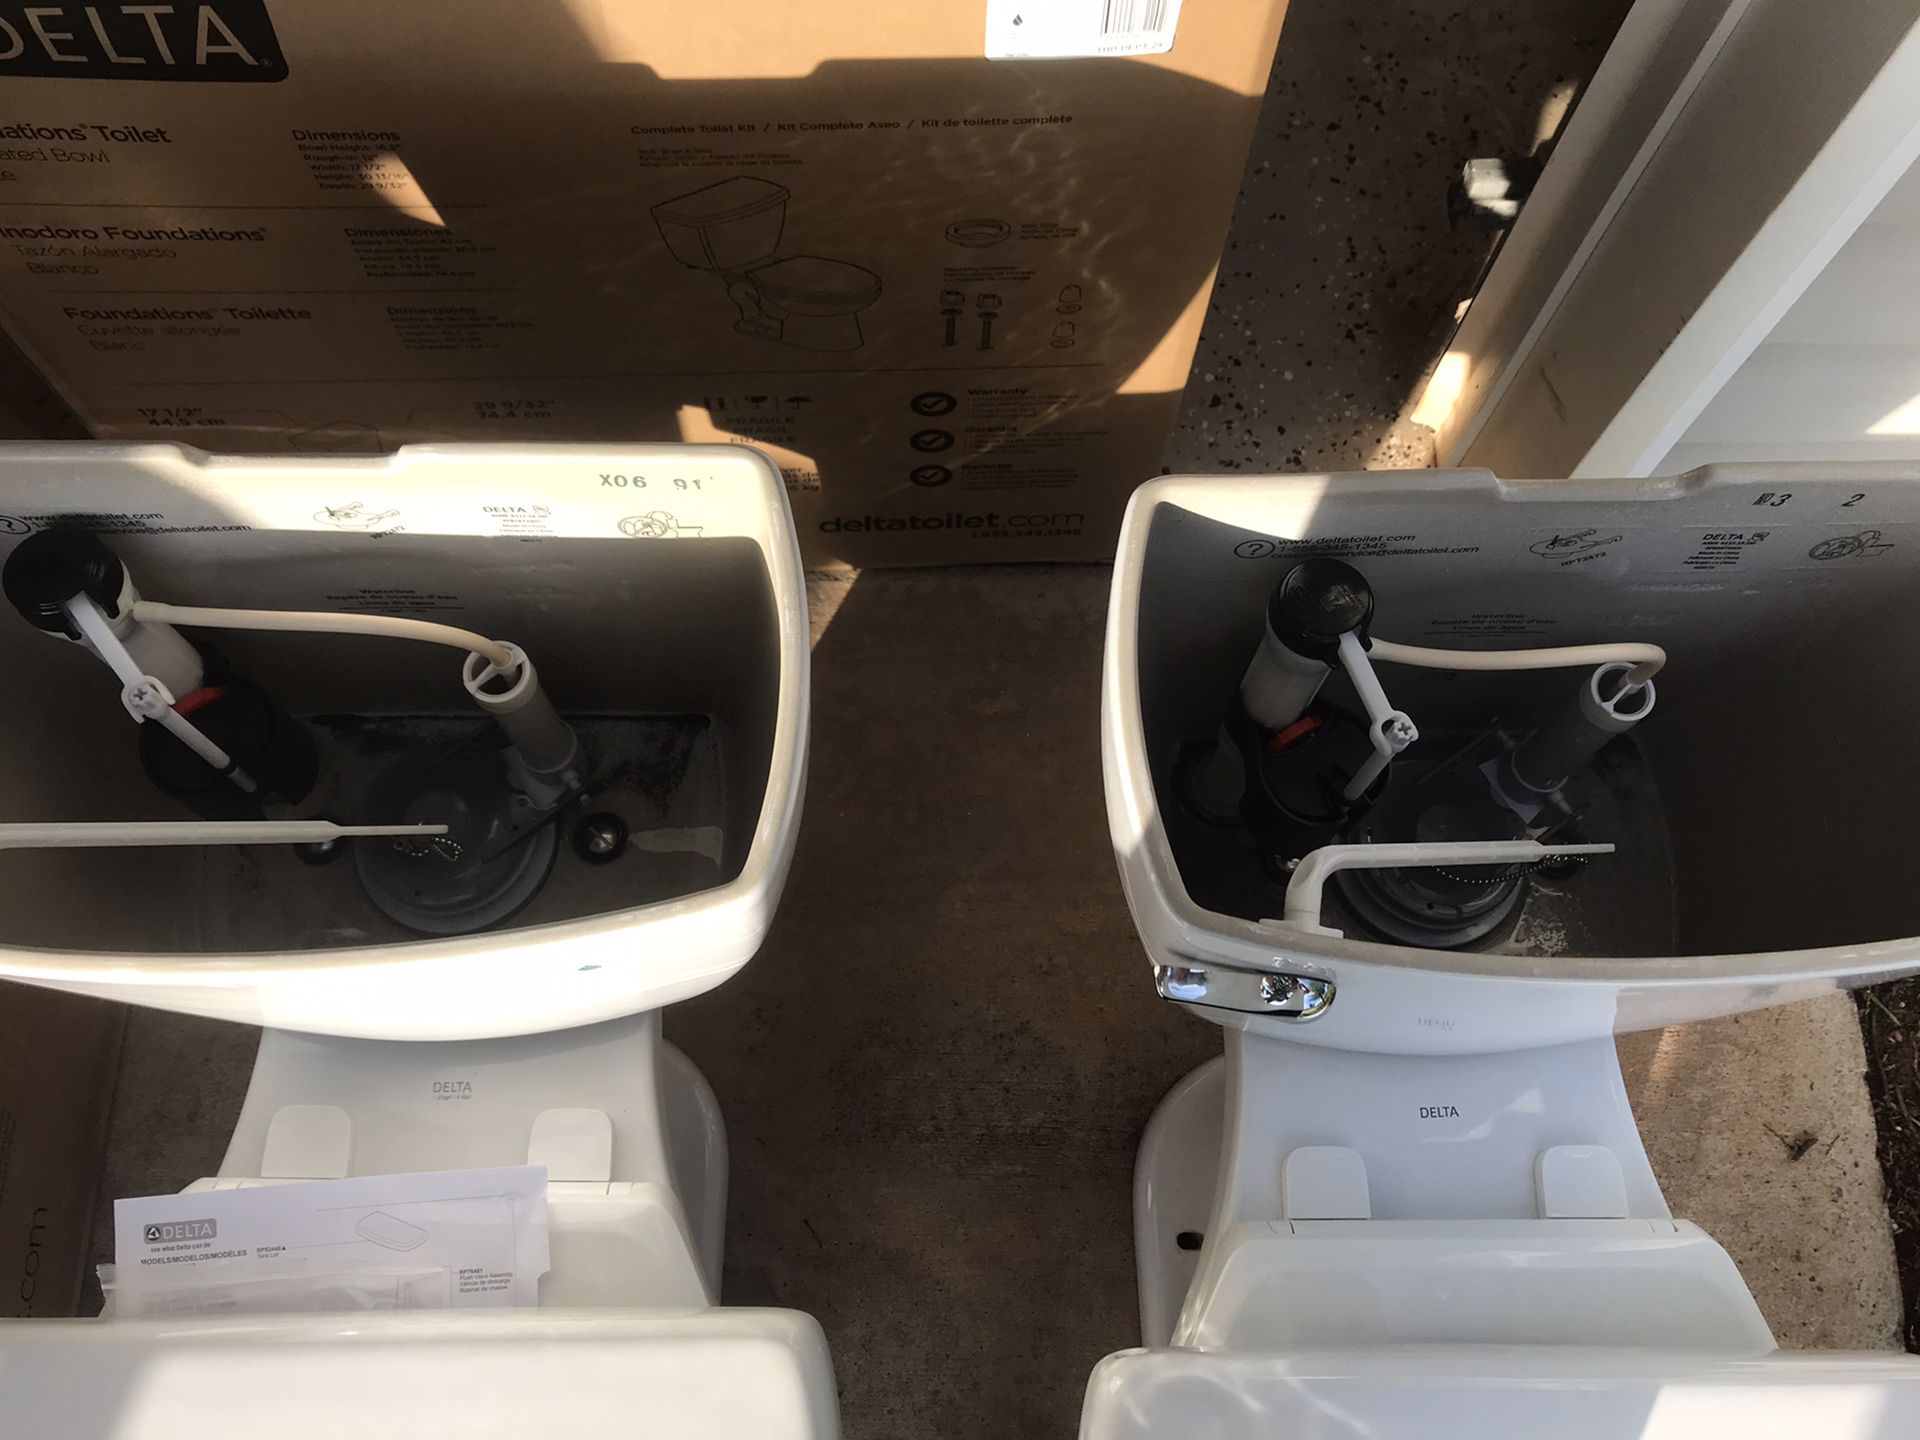 2 Delta Toilets For Sale In Cleveland GA OfferUp